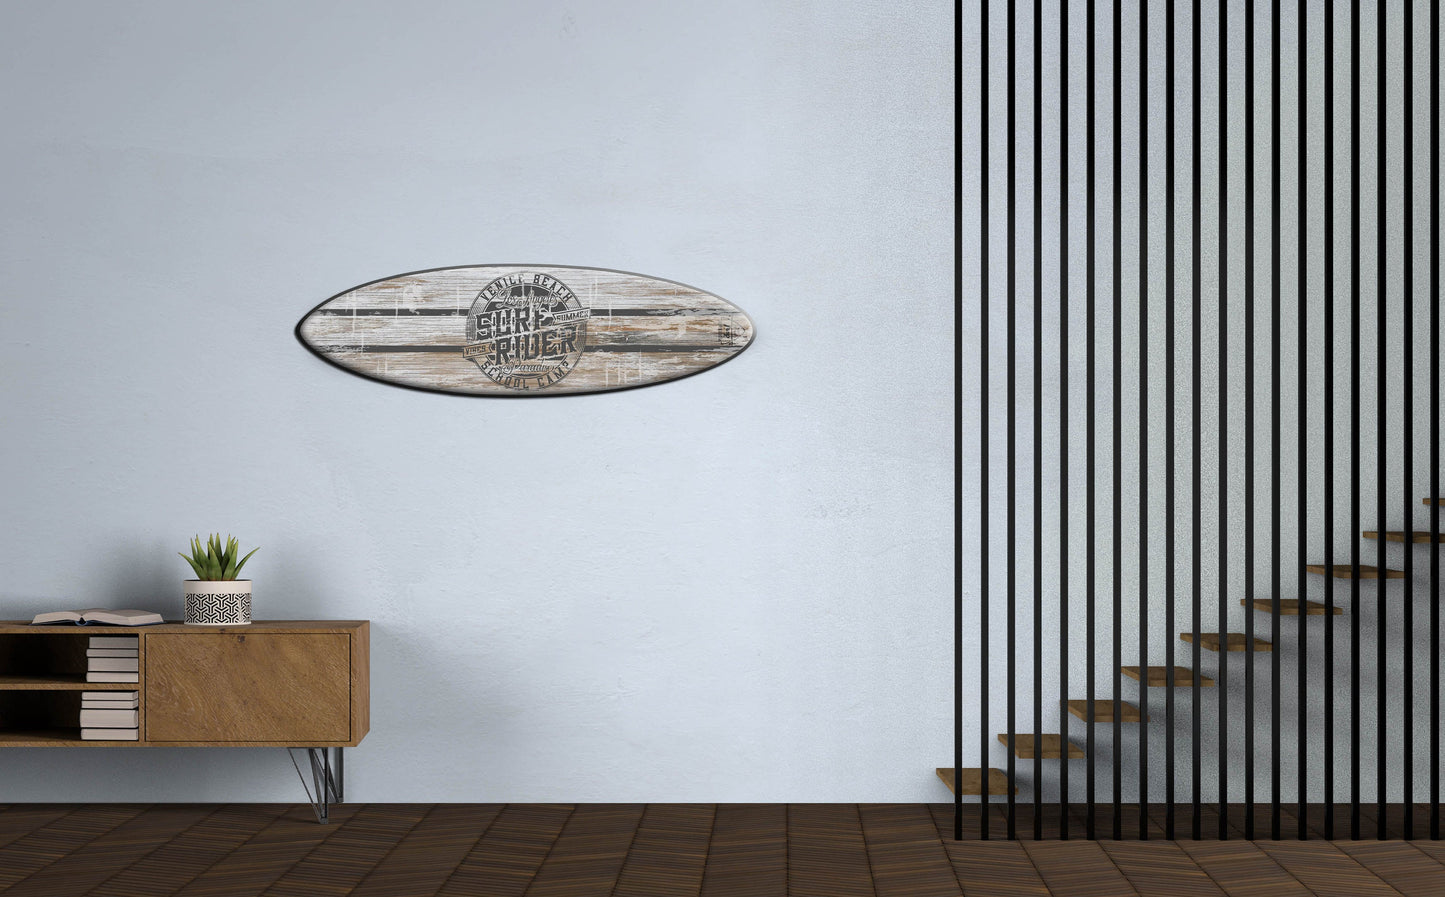 Surfing Board Wall Hanging: Surfboard Wall Sign with Rider Lettering Print for Vibe Decor